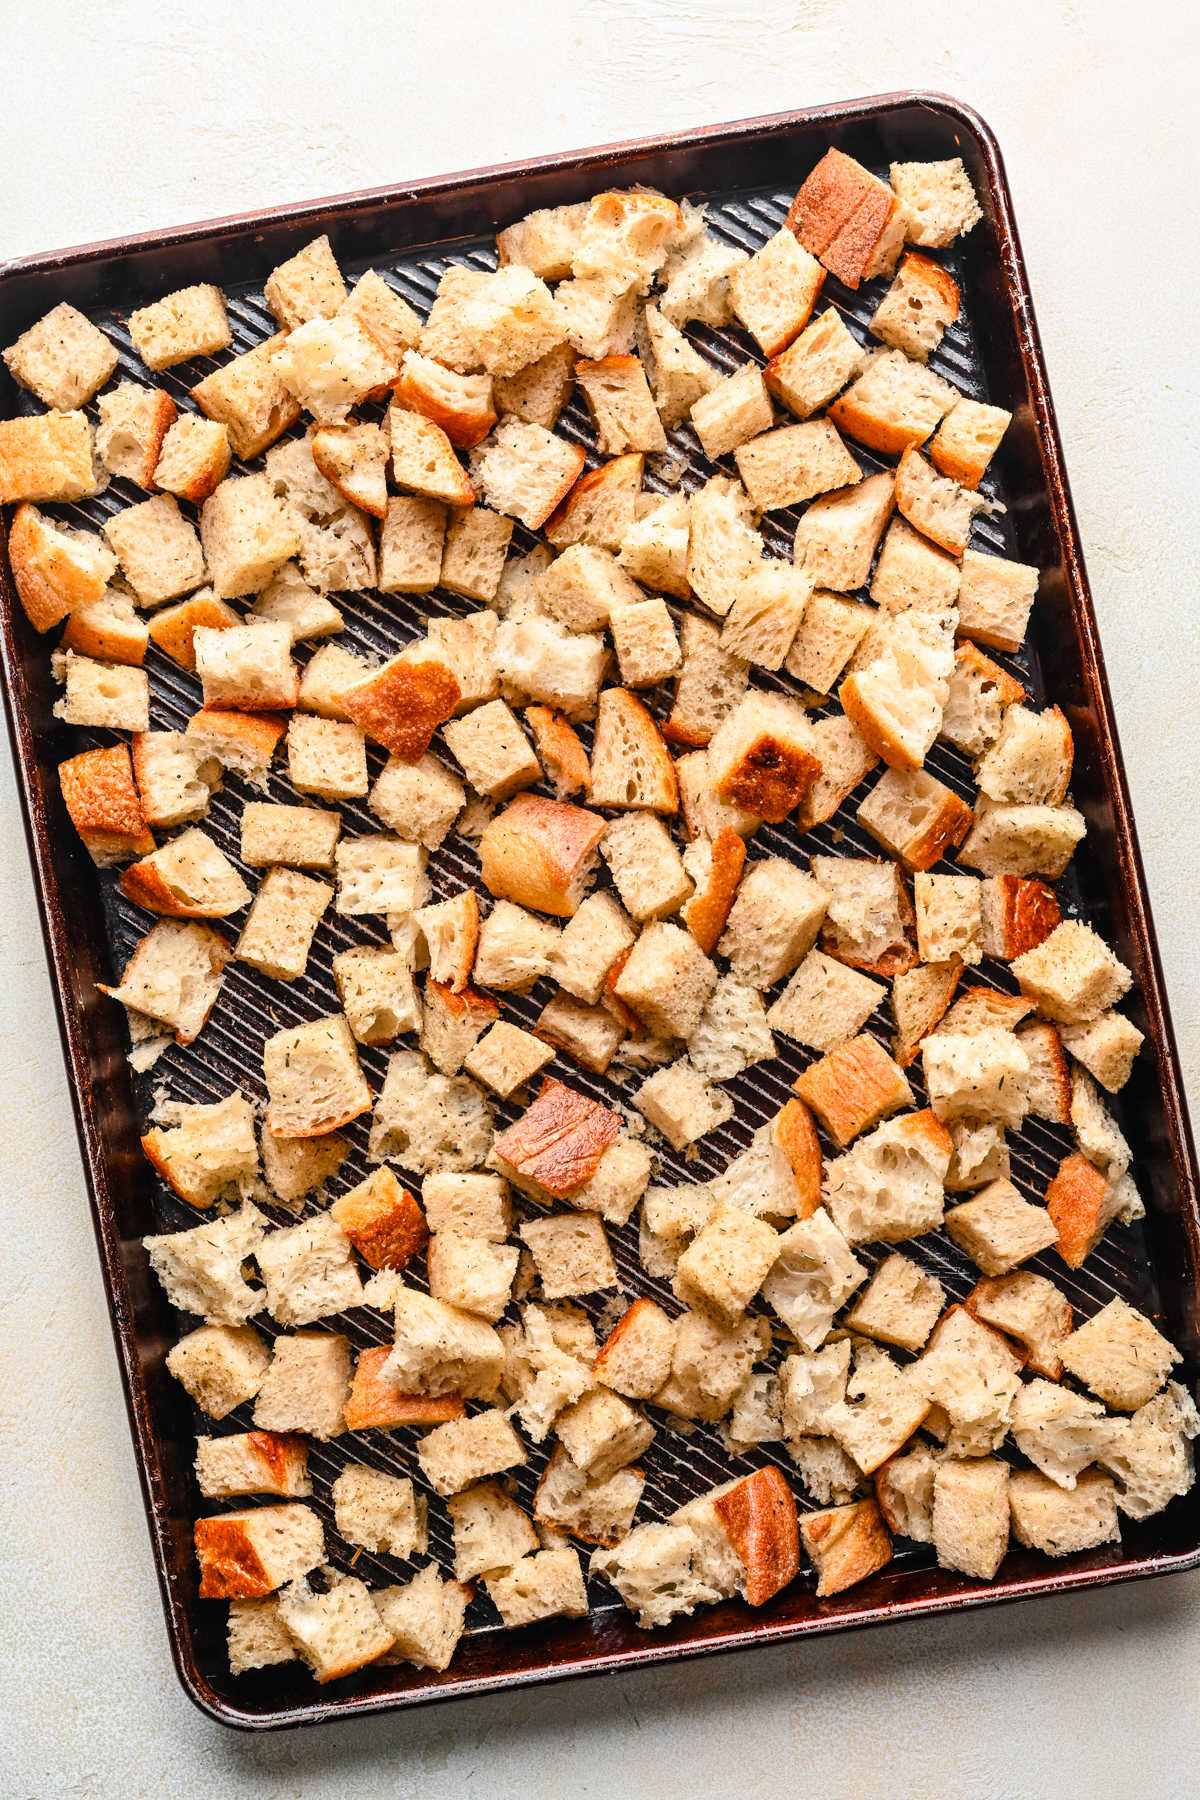 Bread cubes coated in herb olive oil mixture on a baking sheet.